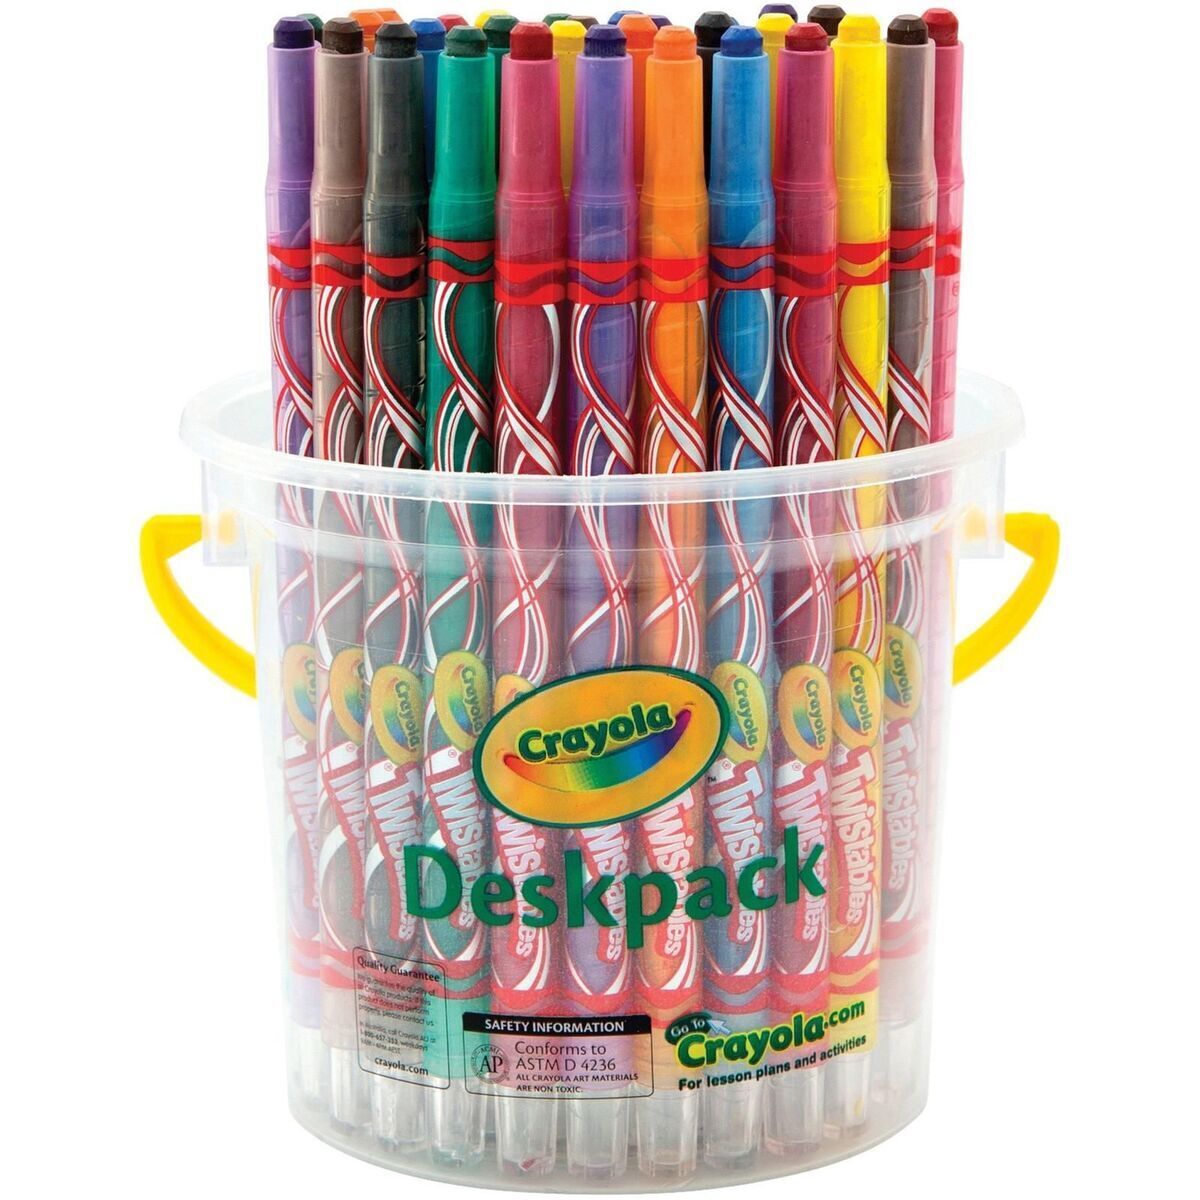 CRAYOLA DESKPACK TWISTABLES CRAYONS 8 Assorted Colours Tub of 32